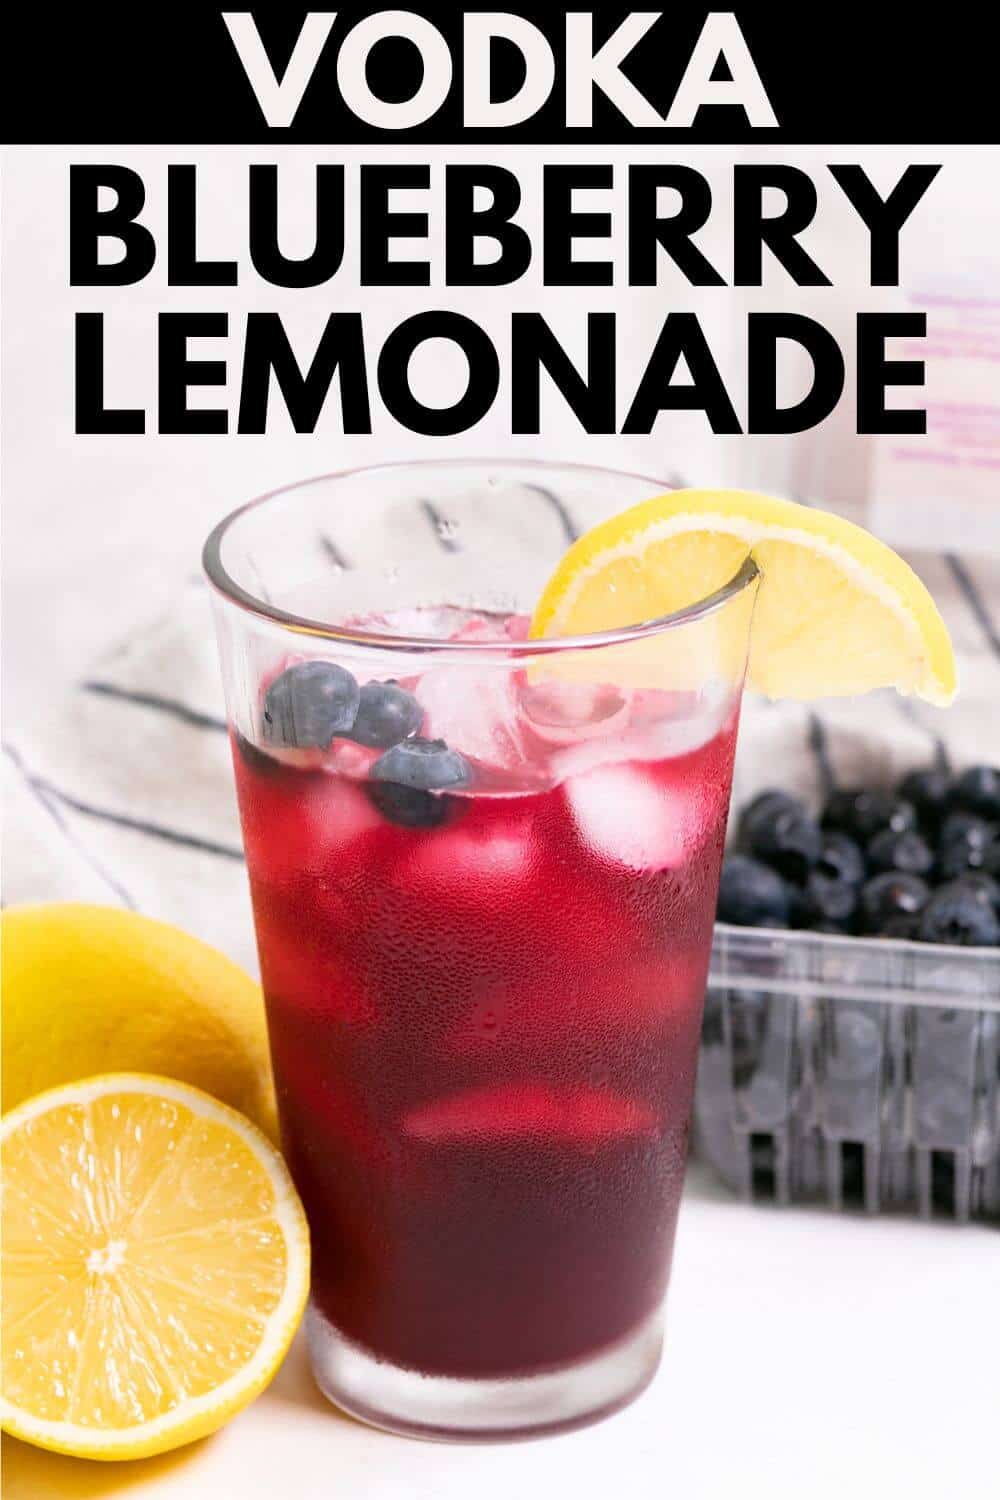 Blueberry vodka lemonade with recipe title text overlay.